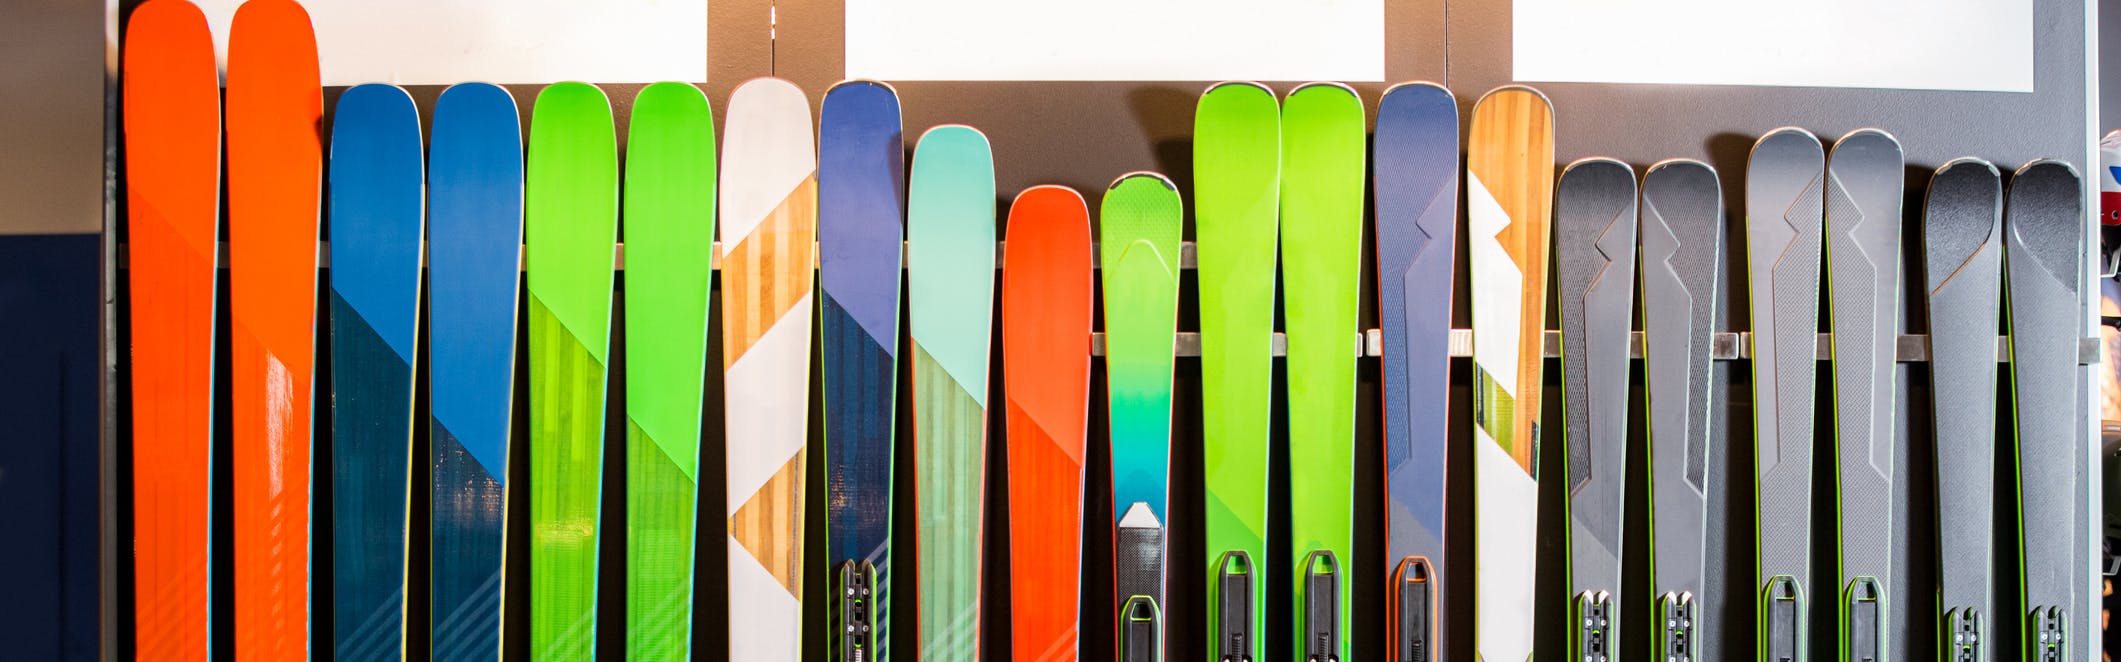 Row of colorful skis